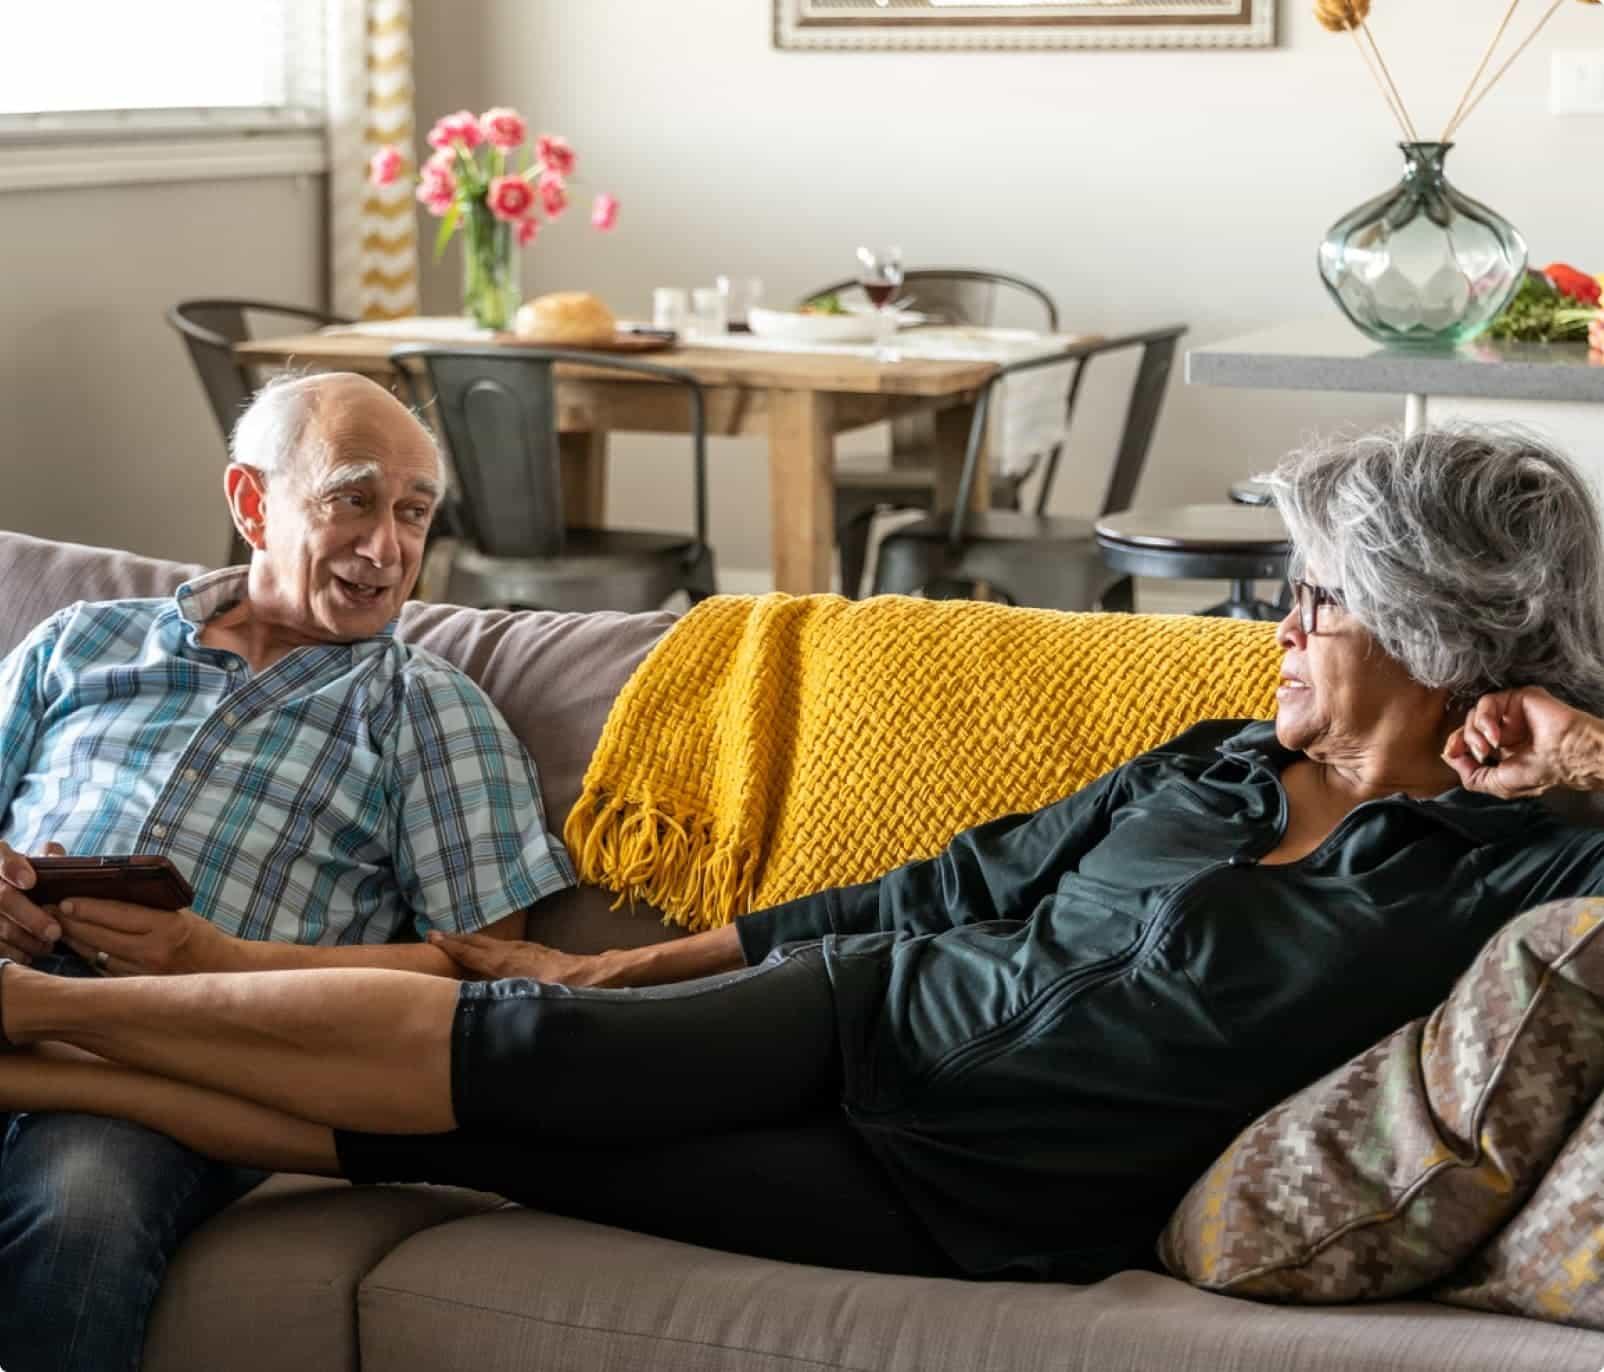 A grey-haired man and woman relaxing on a couch.